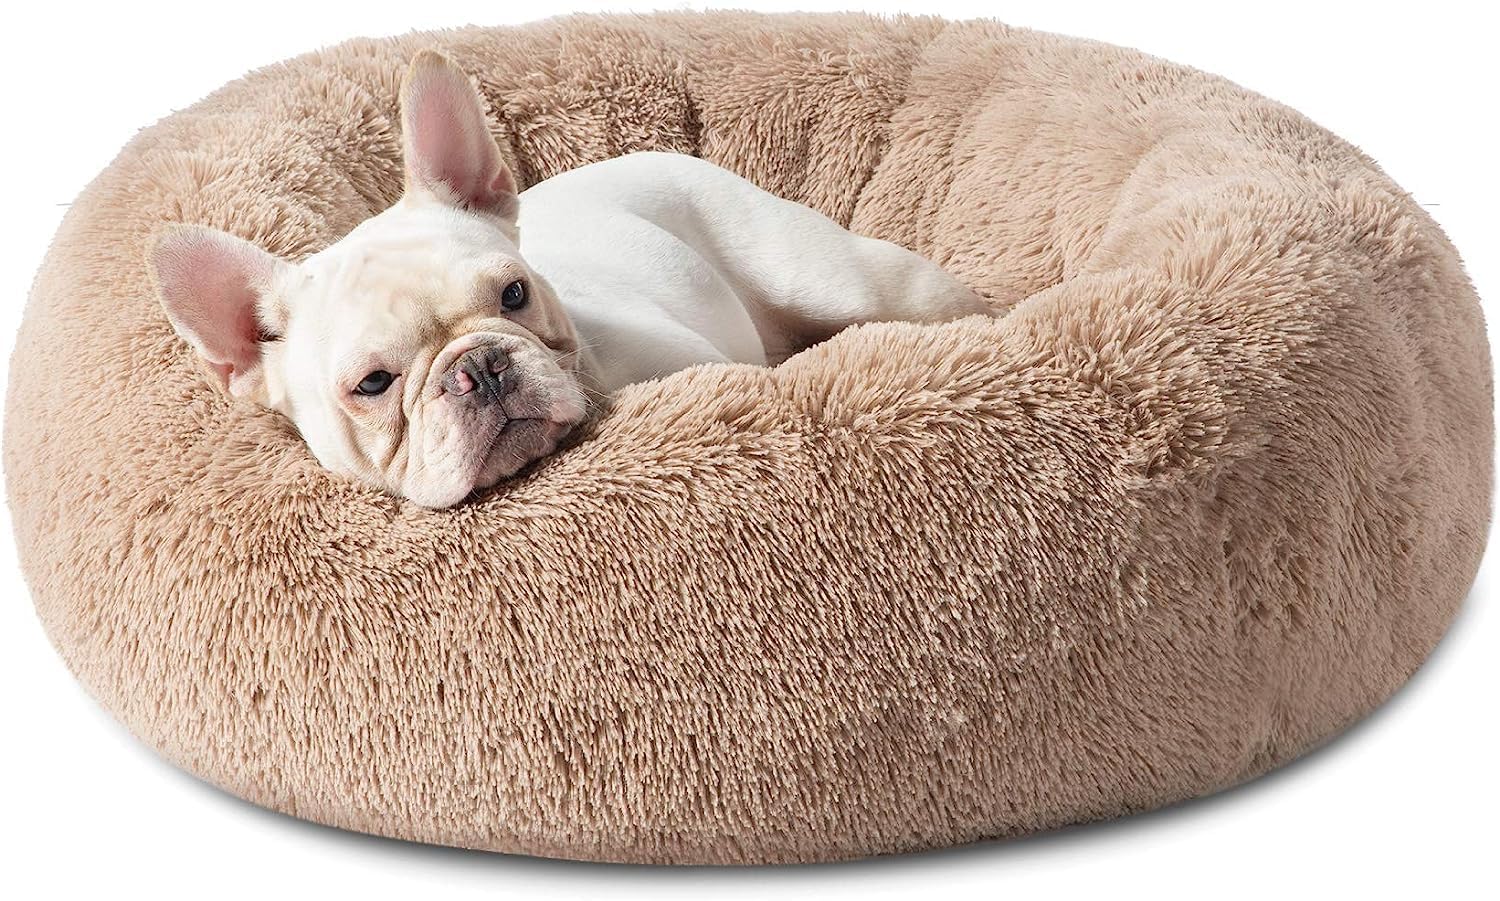 Bedsure Calming Dog Bed for Medium Dogs - Donut Washable Medium Pet Bed, 30 inches Anti-Slip Round Fluffy Plush Faux Fur Cat Bed, Fits up to 45 lbs Pets, Camel